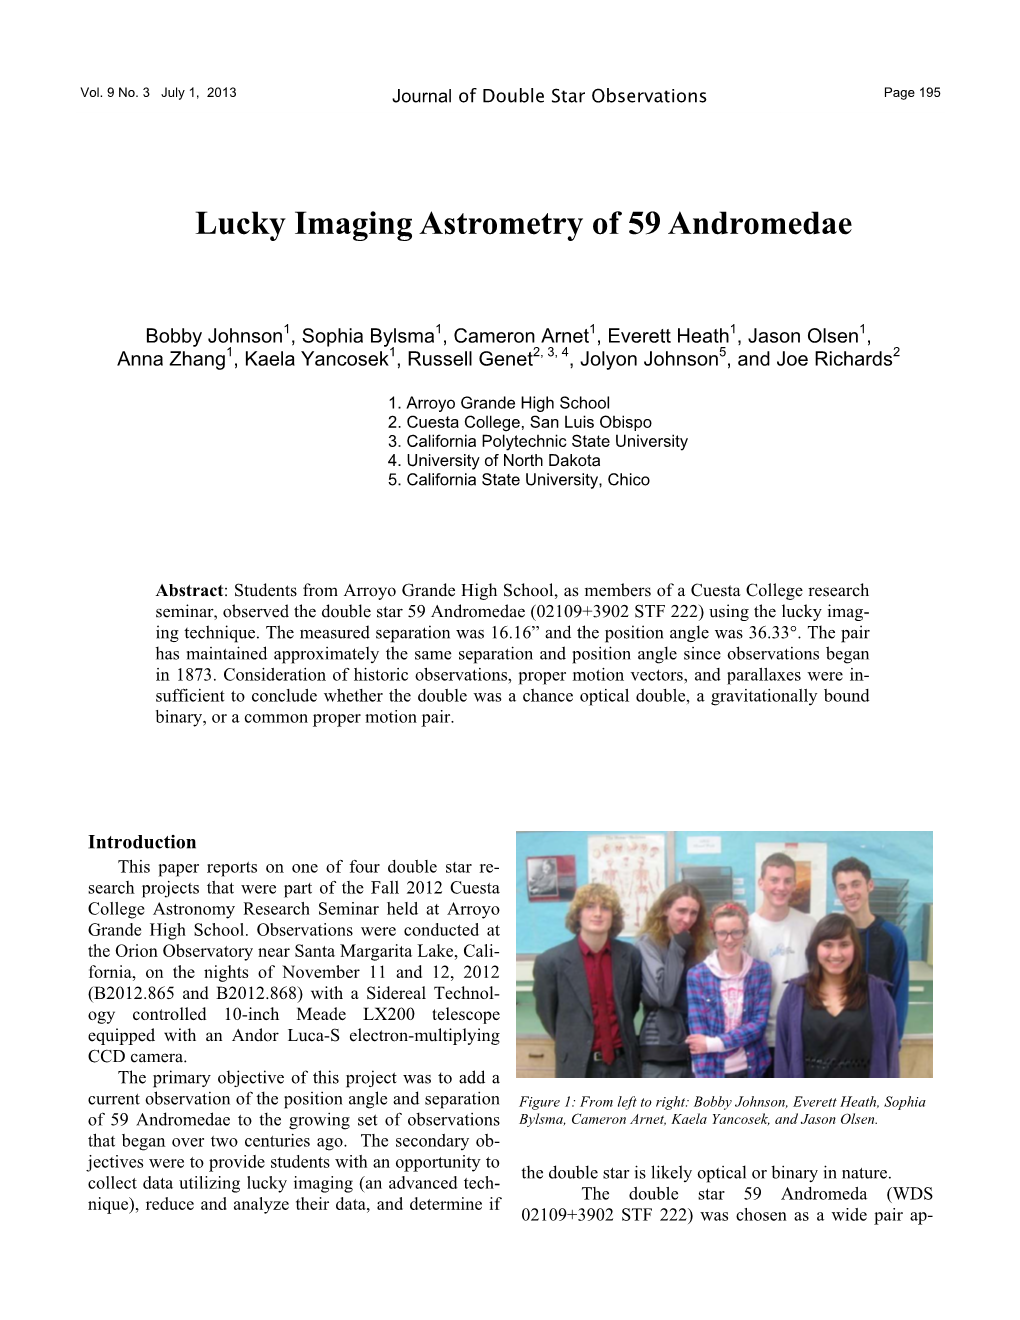 Lucky Imaging Astrometry of 59 Andromedae